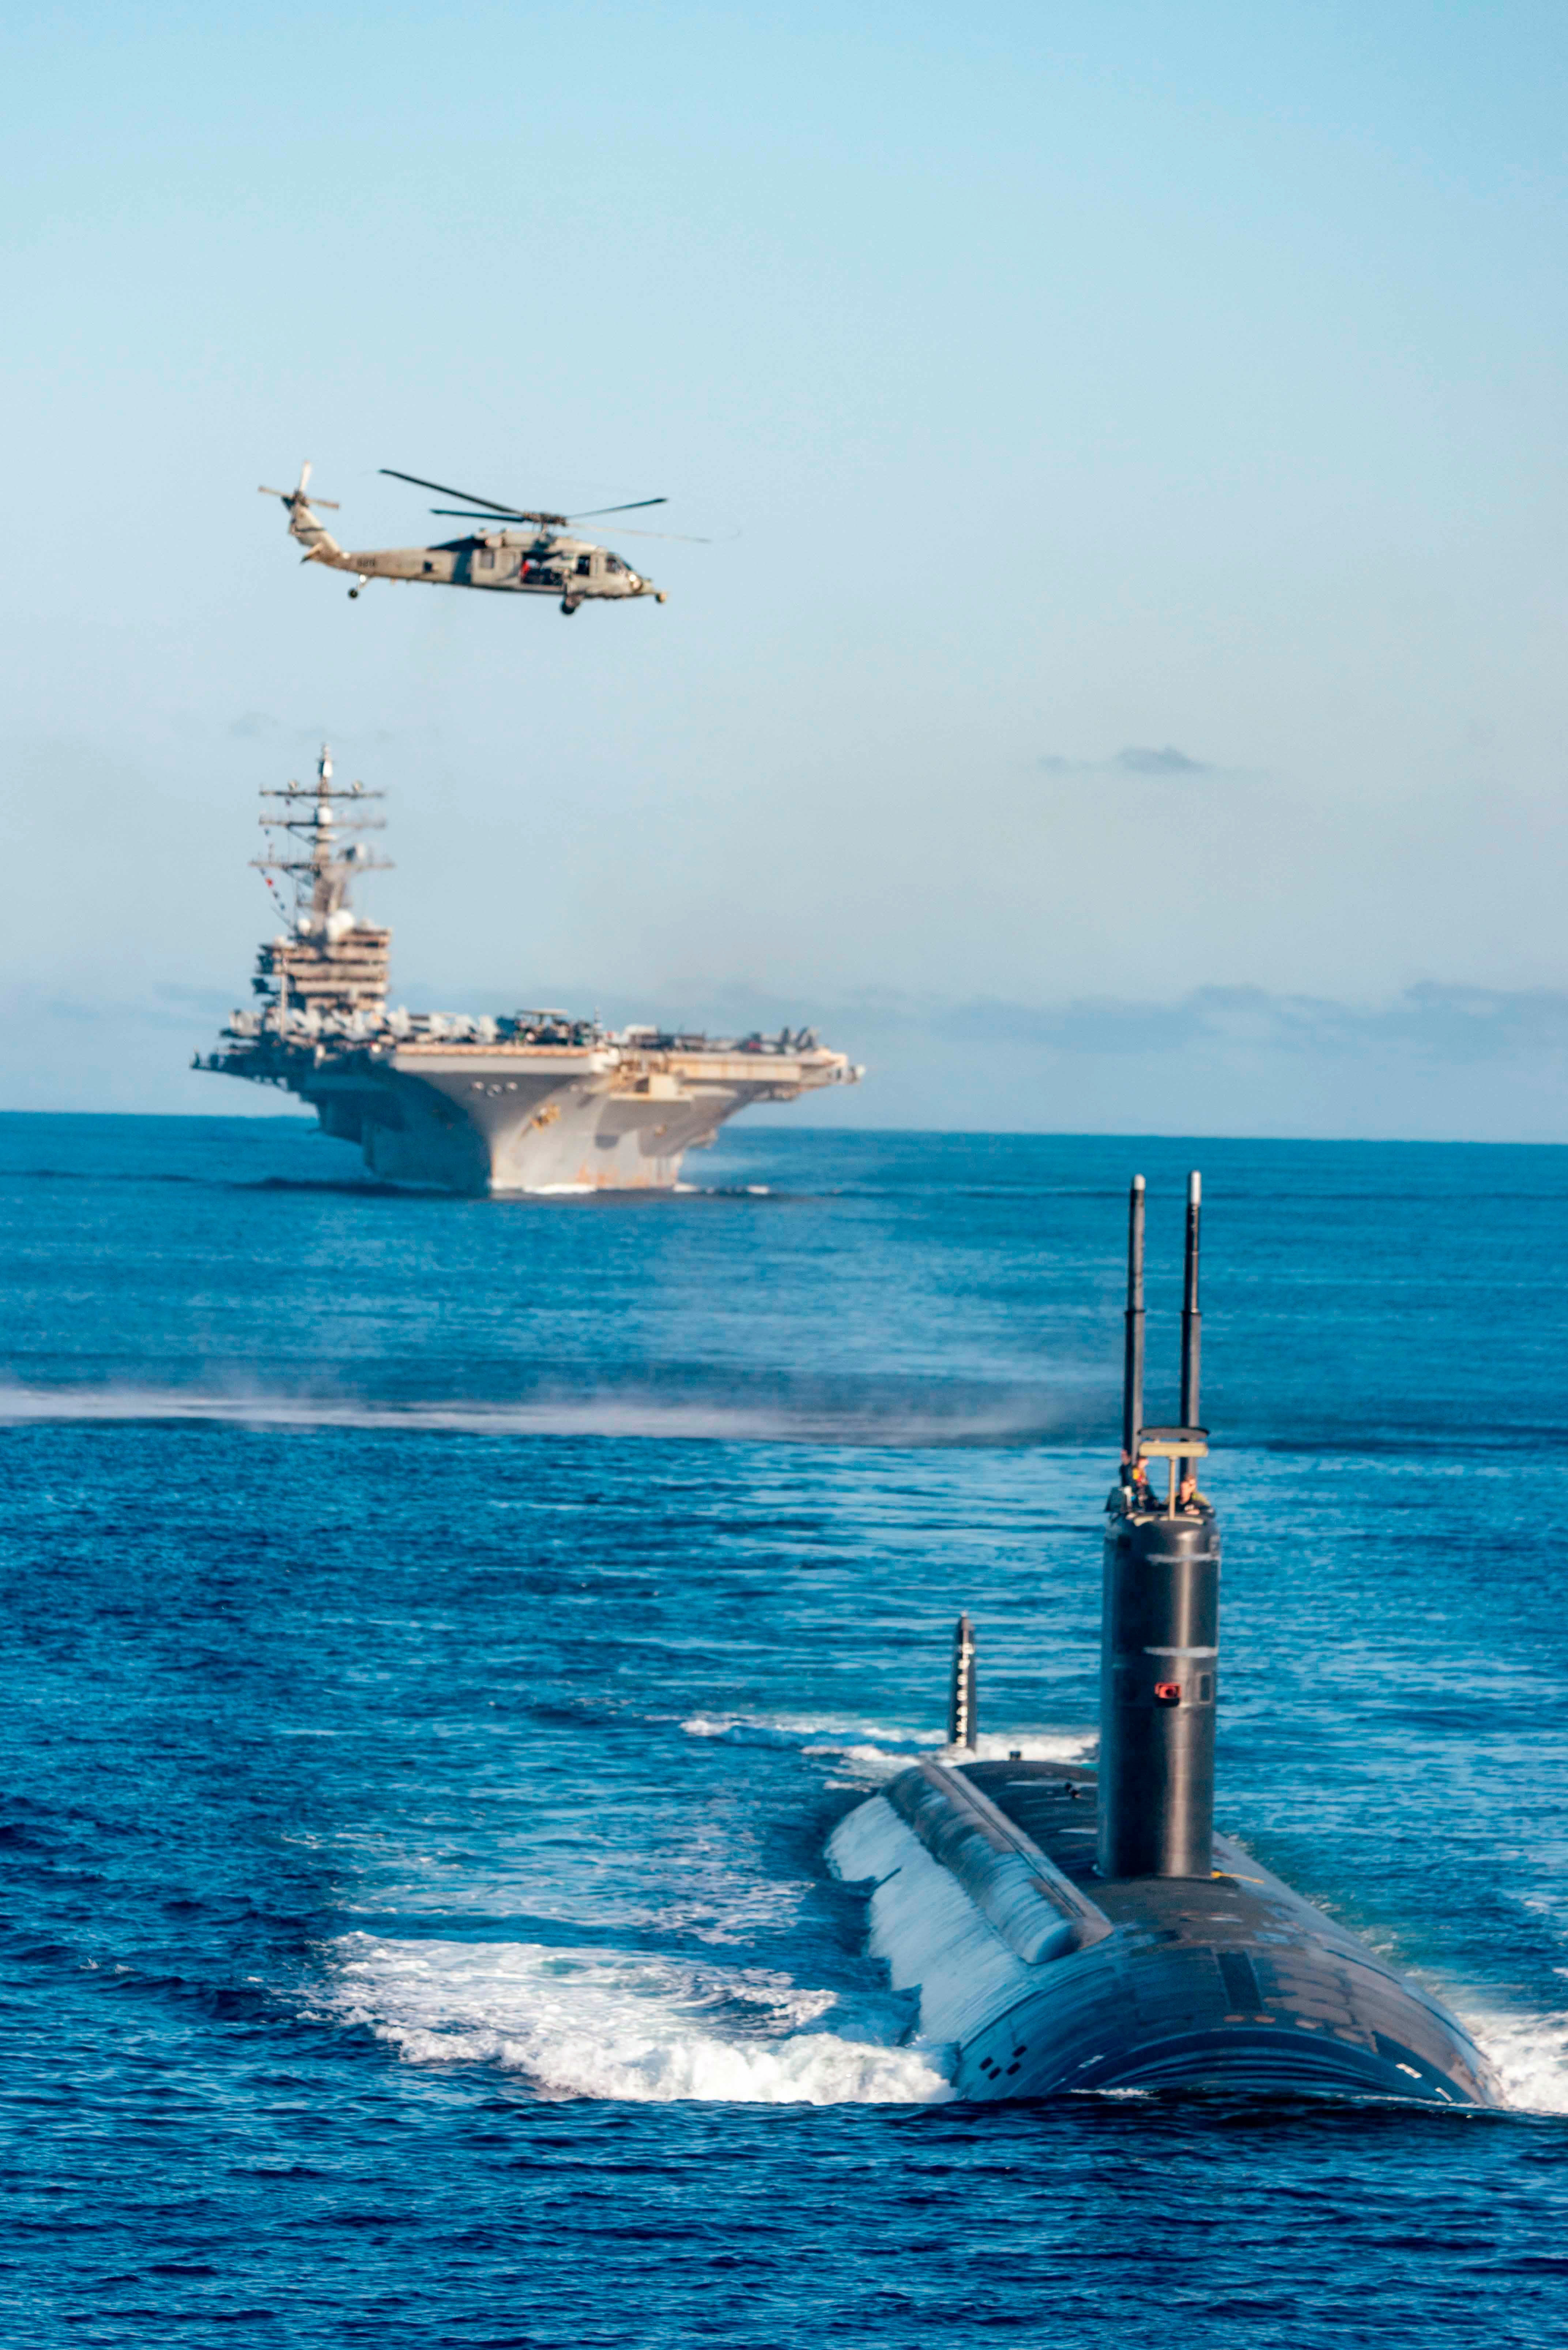 The USS ‘Ronald Reagan’ aircraft carrier and the nuclear-powered submarine USS ‘Annapolis’ participate in a joint anti-submarine drill between South Korea, the United States and Japan in waters off South Korea last year